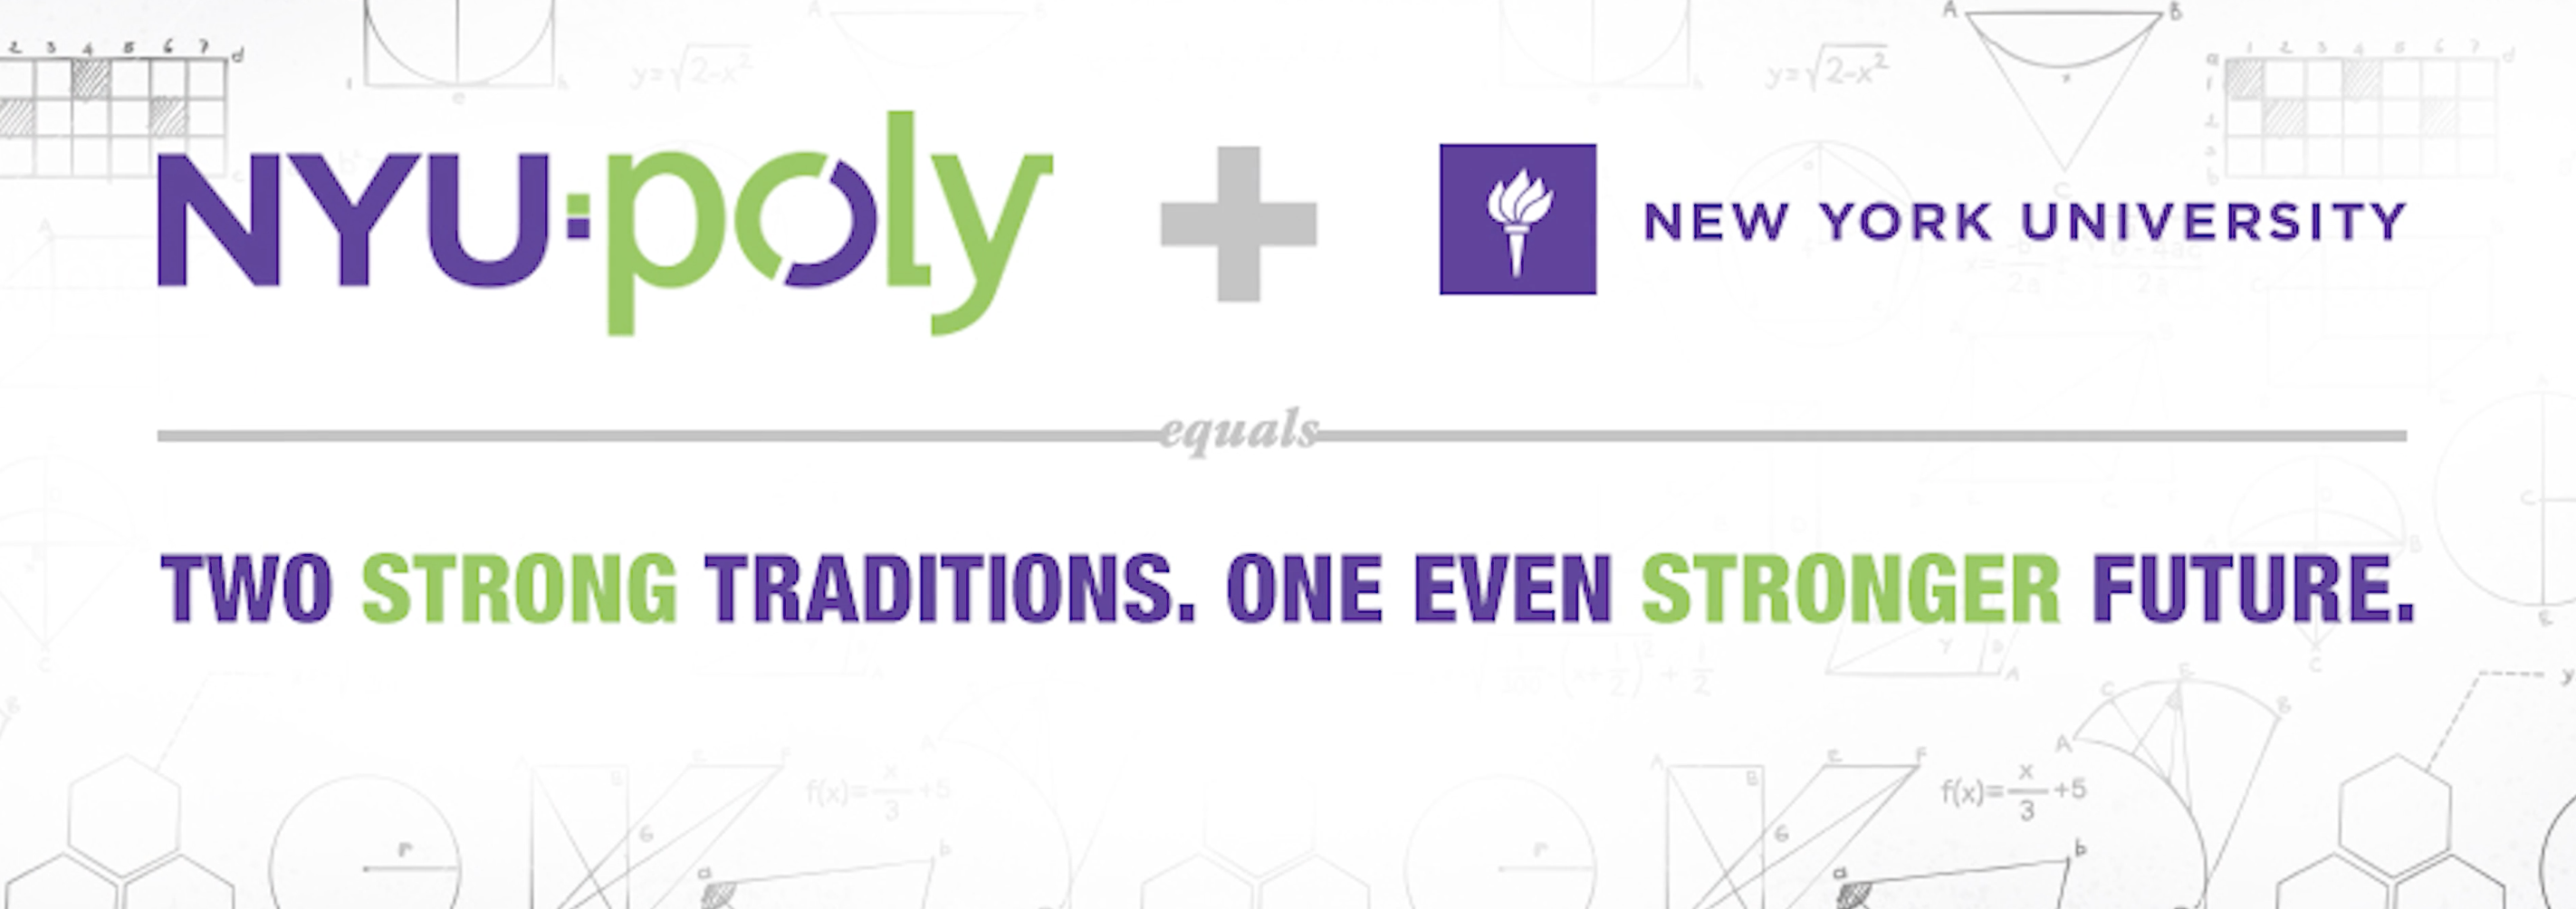 NYU Poly + NYU: 2 strong traditions, 1 even stronger future